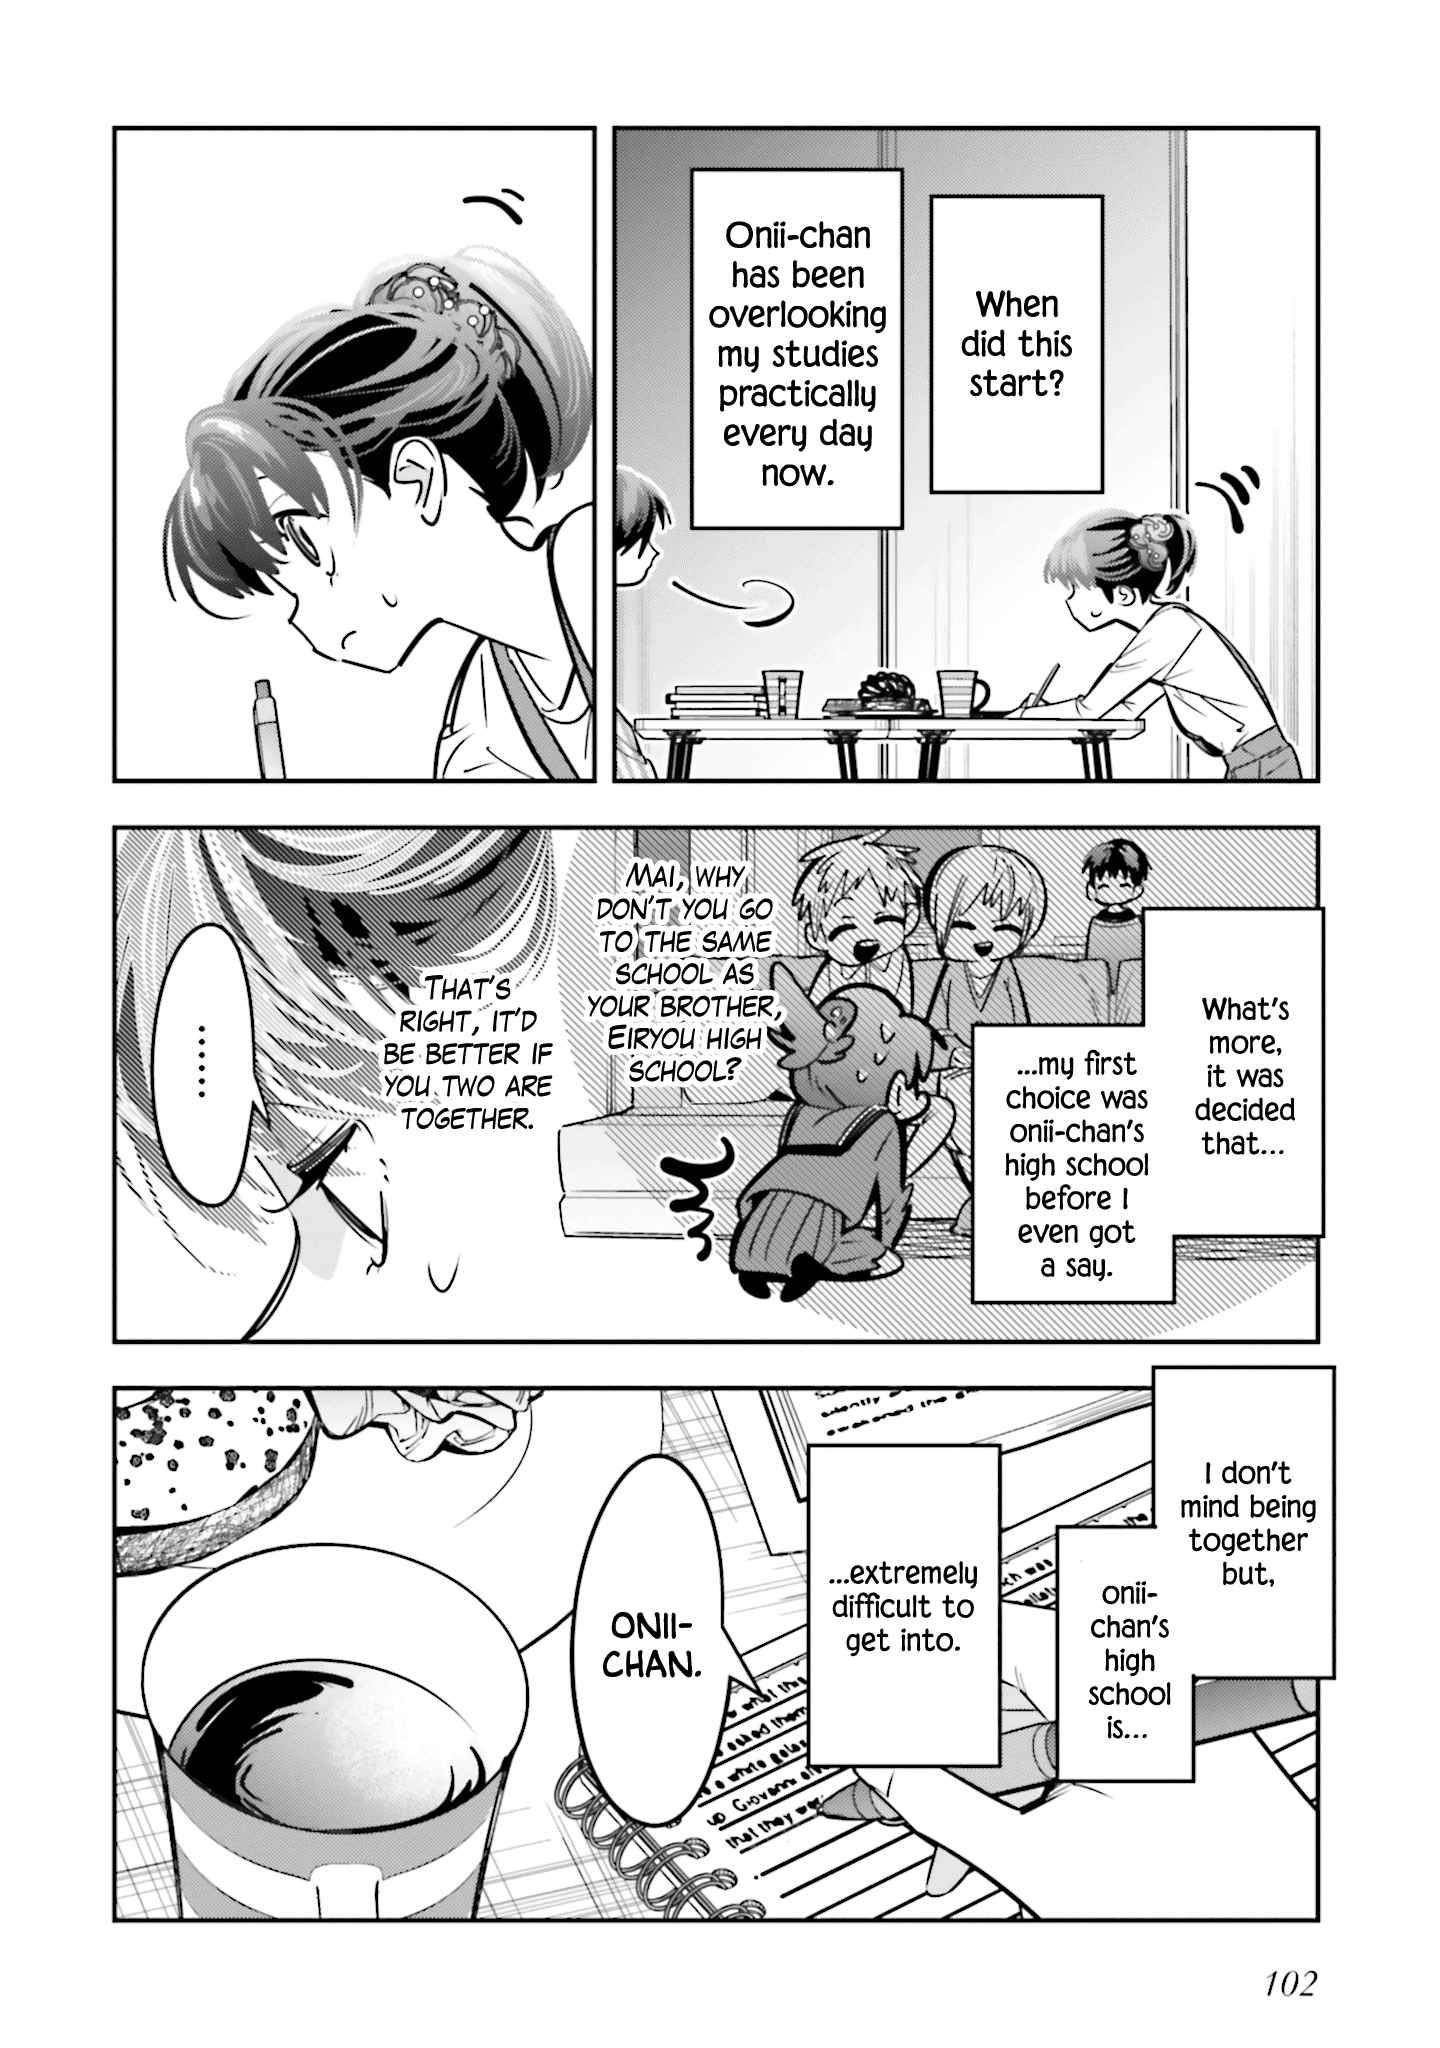 I Reincarnated As The Little Sister Of A Death Game Manga’S Murd3R Mastermind And Failed - chapter 8 - #6